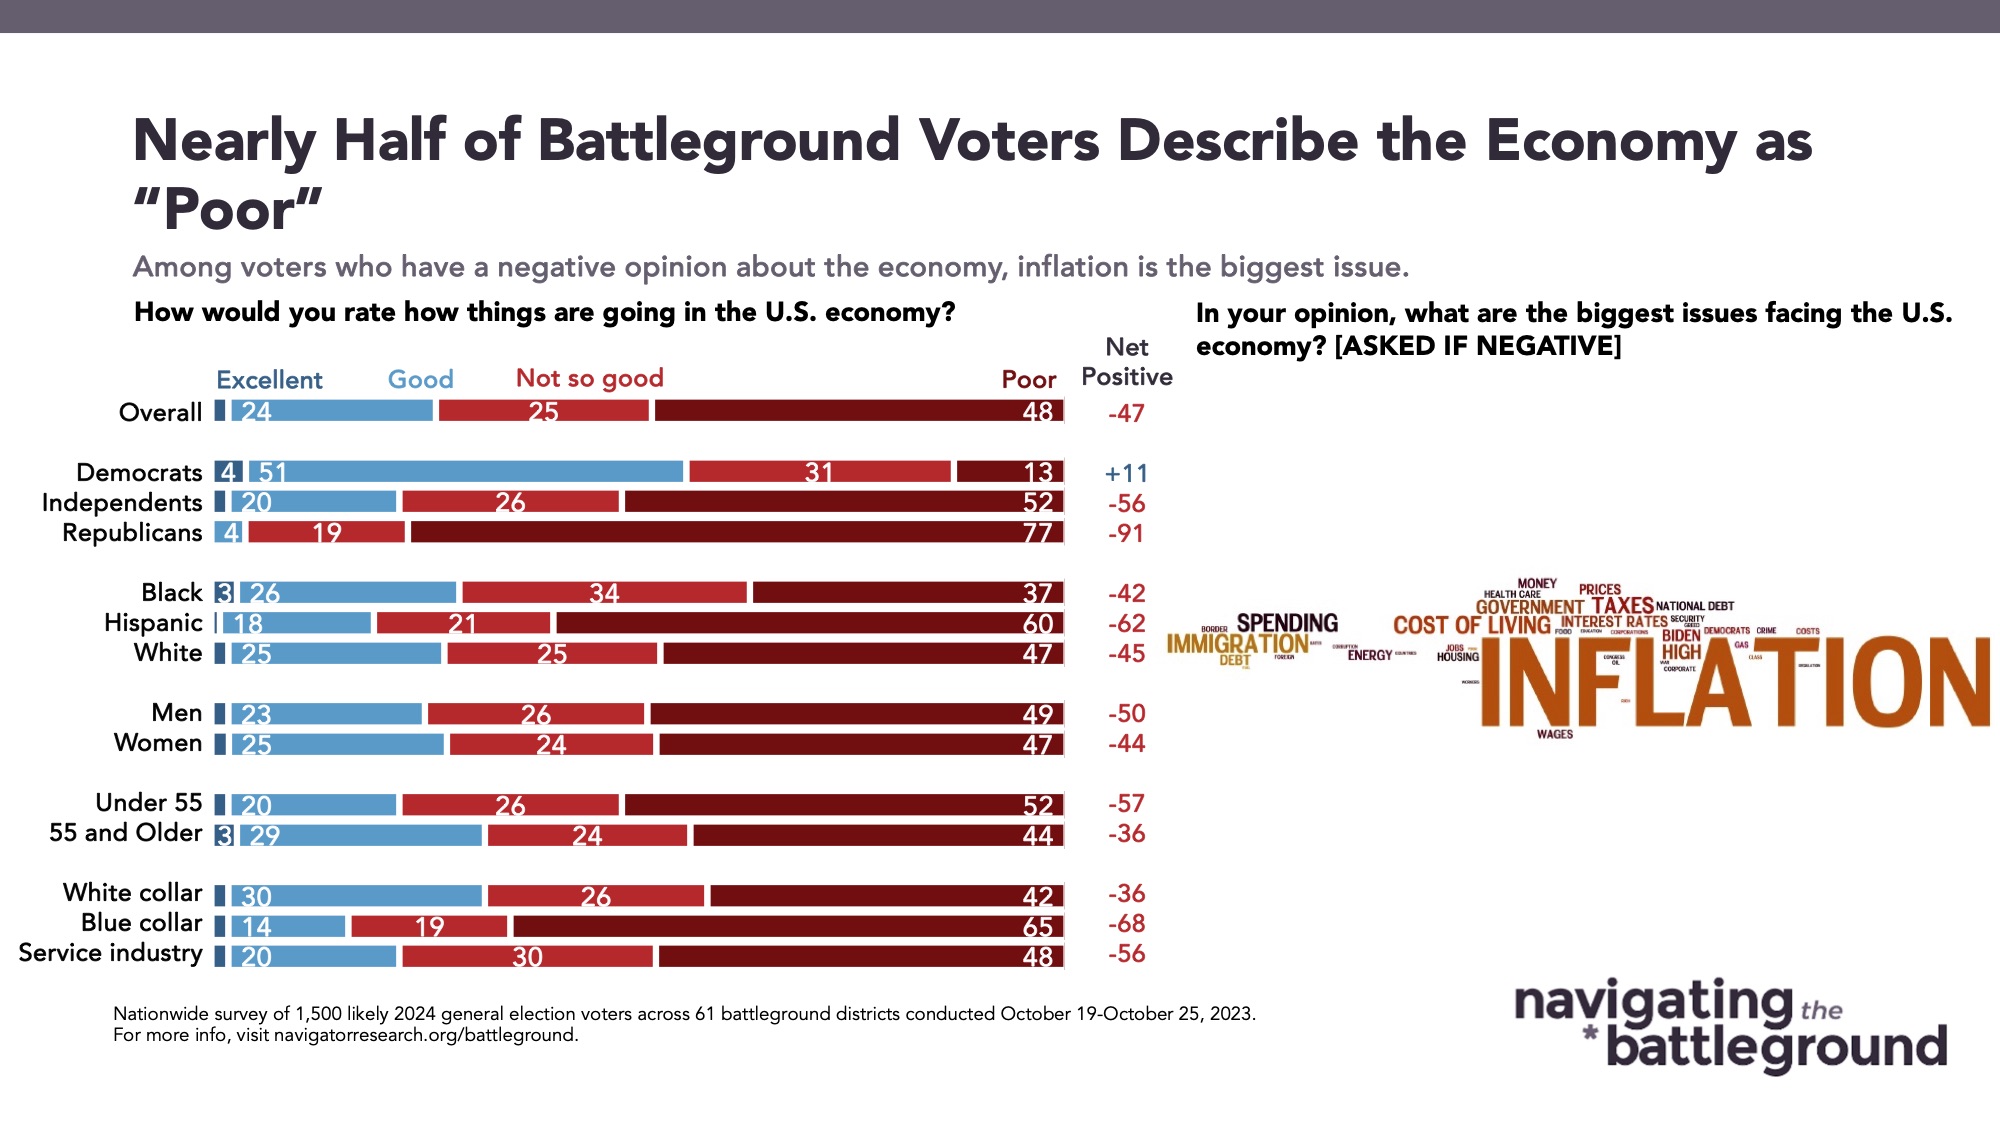 Bar graph of polling data from Navigating the Battleground. Title: Nearly Half of Battleground Voters Describe the Economy as “Poor”